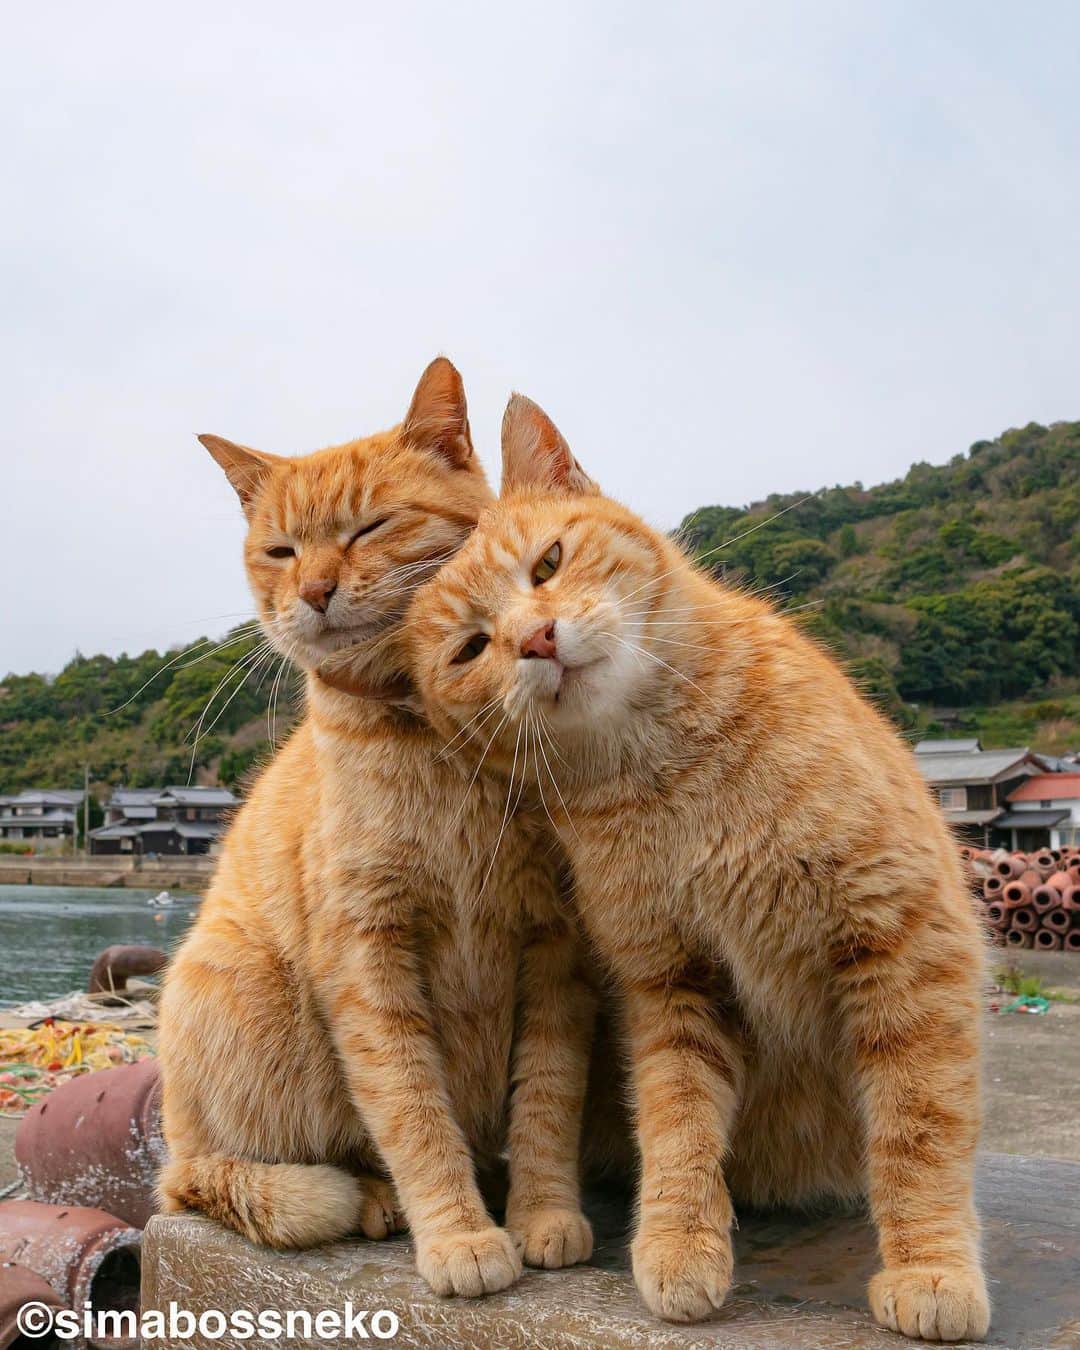 simabossnekoさんのインスタグラム写真 - (simabossnekoInstagram)「・ 島にゃんこ仲良しセレクション❣️ New Photobook "Island cats(Shima Nyanko)" is full of adorable moments✨ Swipeしてね←←🐾  写真は全て「島にゃんこ」より抜粋。 All photos are excerpted from "Island cats(Shima Nyanko)".  〜お知らせ〜 新作写真集「島にゃんこ」好評発売中❣️ @simabossneko と、ぺにゃんこ( @p_nyanco22 )との初共著🐾  日本の島々で7年間撮り続けてきた、島の猫さん達のとびっきりの表情やしぐさがいっぱい✨ 厳選したベストショットから初公開の作品まで、愛おしくて幸せな瞬間を集めました。  ★メルカリShopsとminneのsimabossneko's shopでは、サイン入り写真集を販売中🐾  お気に入りの一冊になれば嬉しく思います☺️  📘A5変形サイズ／88ページ 1,210円(税込) ワニブックス刊  販売各ショップへは @simabossneko もしくは @p_nyanco22 のプロフィールURLよりご覧いただけます。  もしくはminne、メルカリShops内にて "simabossneko's shop"と検索ください🔎 ・ ・ 【Notice】 NEW 3rd Photobook "Shima Nyanko (Island Cats)"  The book is co-authored by @simabossneko and @p_nyanco22  There are lots of wonderful photos of island cats✨  ◆The autographed books are available now at “minne simabossneko's shop“.   〜Description of the work〜 The cute cats that we have been shooting for 7 years in the islands of Japan.  From the carefully selected best shots to the first public photo, we have collected lovely and happy gestures. Kissing, cuddling, rubbing, synchronizing, playing, licking... The cats will heal you!  Please make a purchasing for this opportunity 😸🐾 The product page can be seen from the URL in the profile of @simabossneko or @p_nyanco22   ★Amazon Japan https://www.amazon.co.jp/dp/4847072863  ★simabossneko's shop URL https://minne.com/＠simabossneko  It is possible to purchase and ship from Taiwan, Hong Kong, the USA, Korea, etc. ※ Shipping fee will be charged separately.  📘A5 variant size / 88 pages 1,210 JPY Published by Wanibooks ・ ・ #しまねこ #島猫 #ねこ #にゃんすたぐらむ #猫写真 #cats_of_world #catloversclub #pleasantcats #catstagram #meowed #ig_japan #lumixg9」5月31日 8時30分 - simabossneko